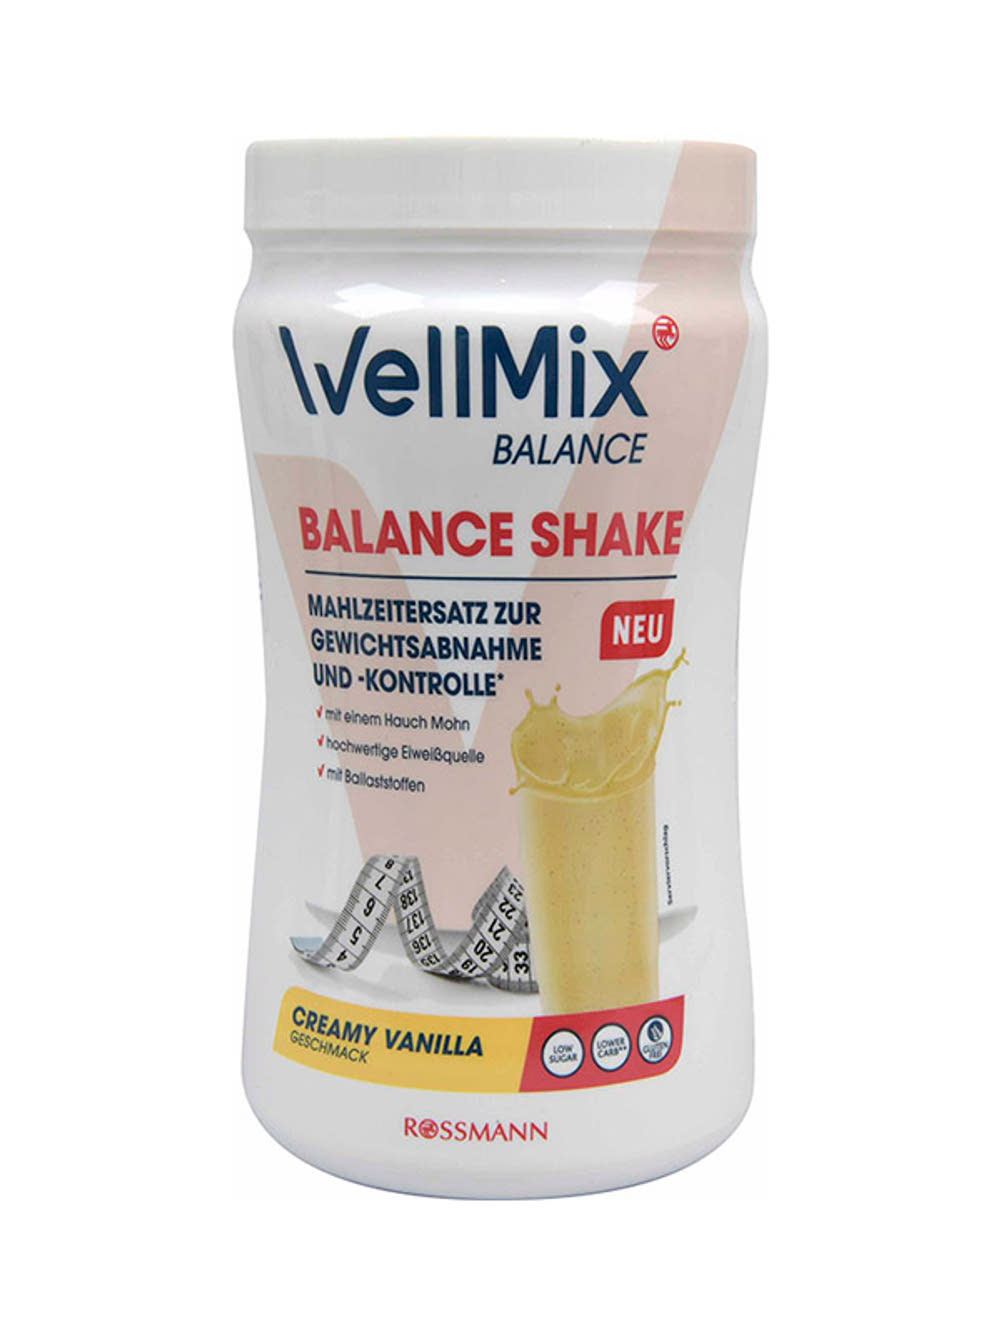 Ord At håndtere accelerator Well Mix Balance Vanille Shake - 350 g